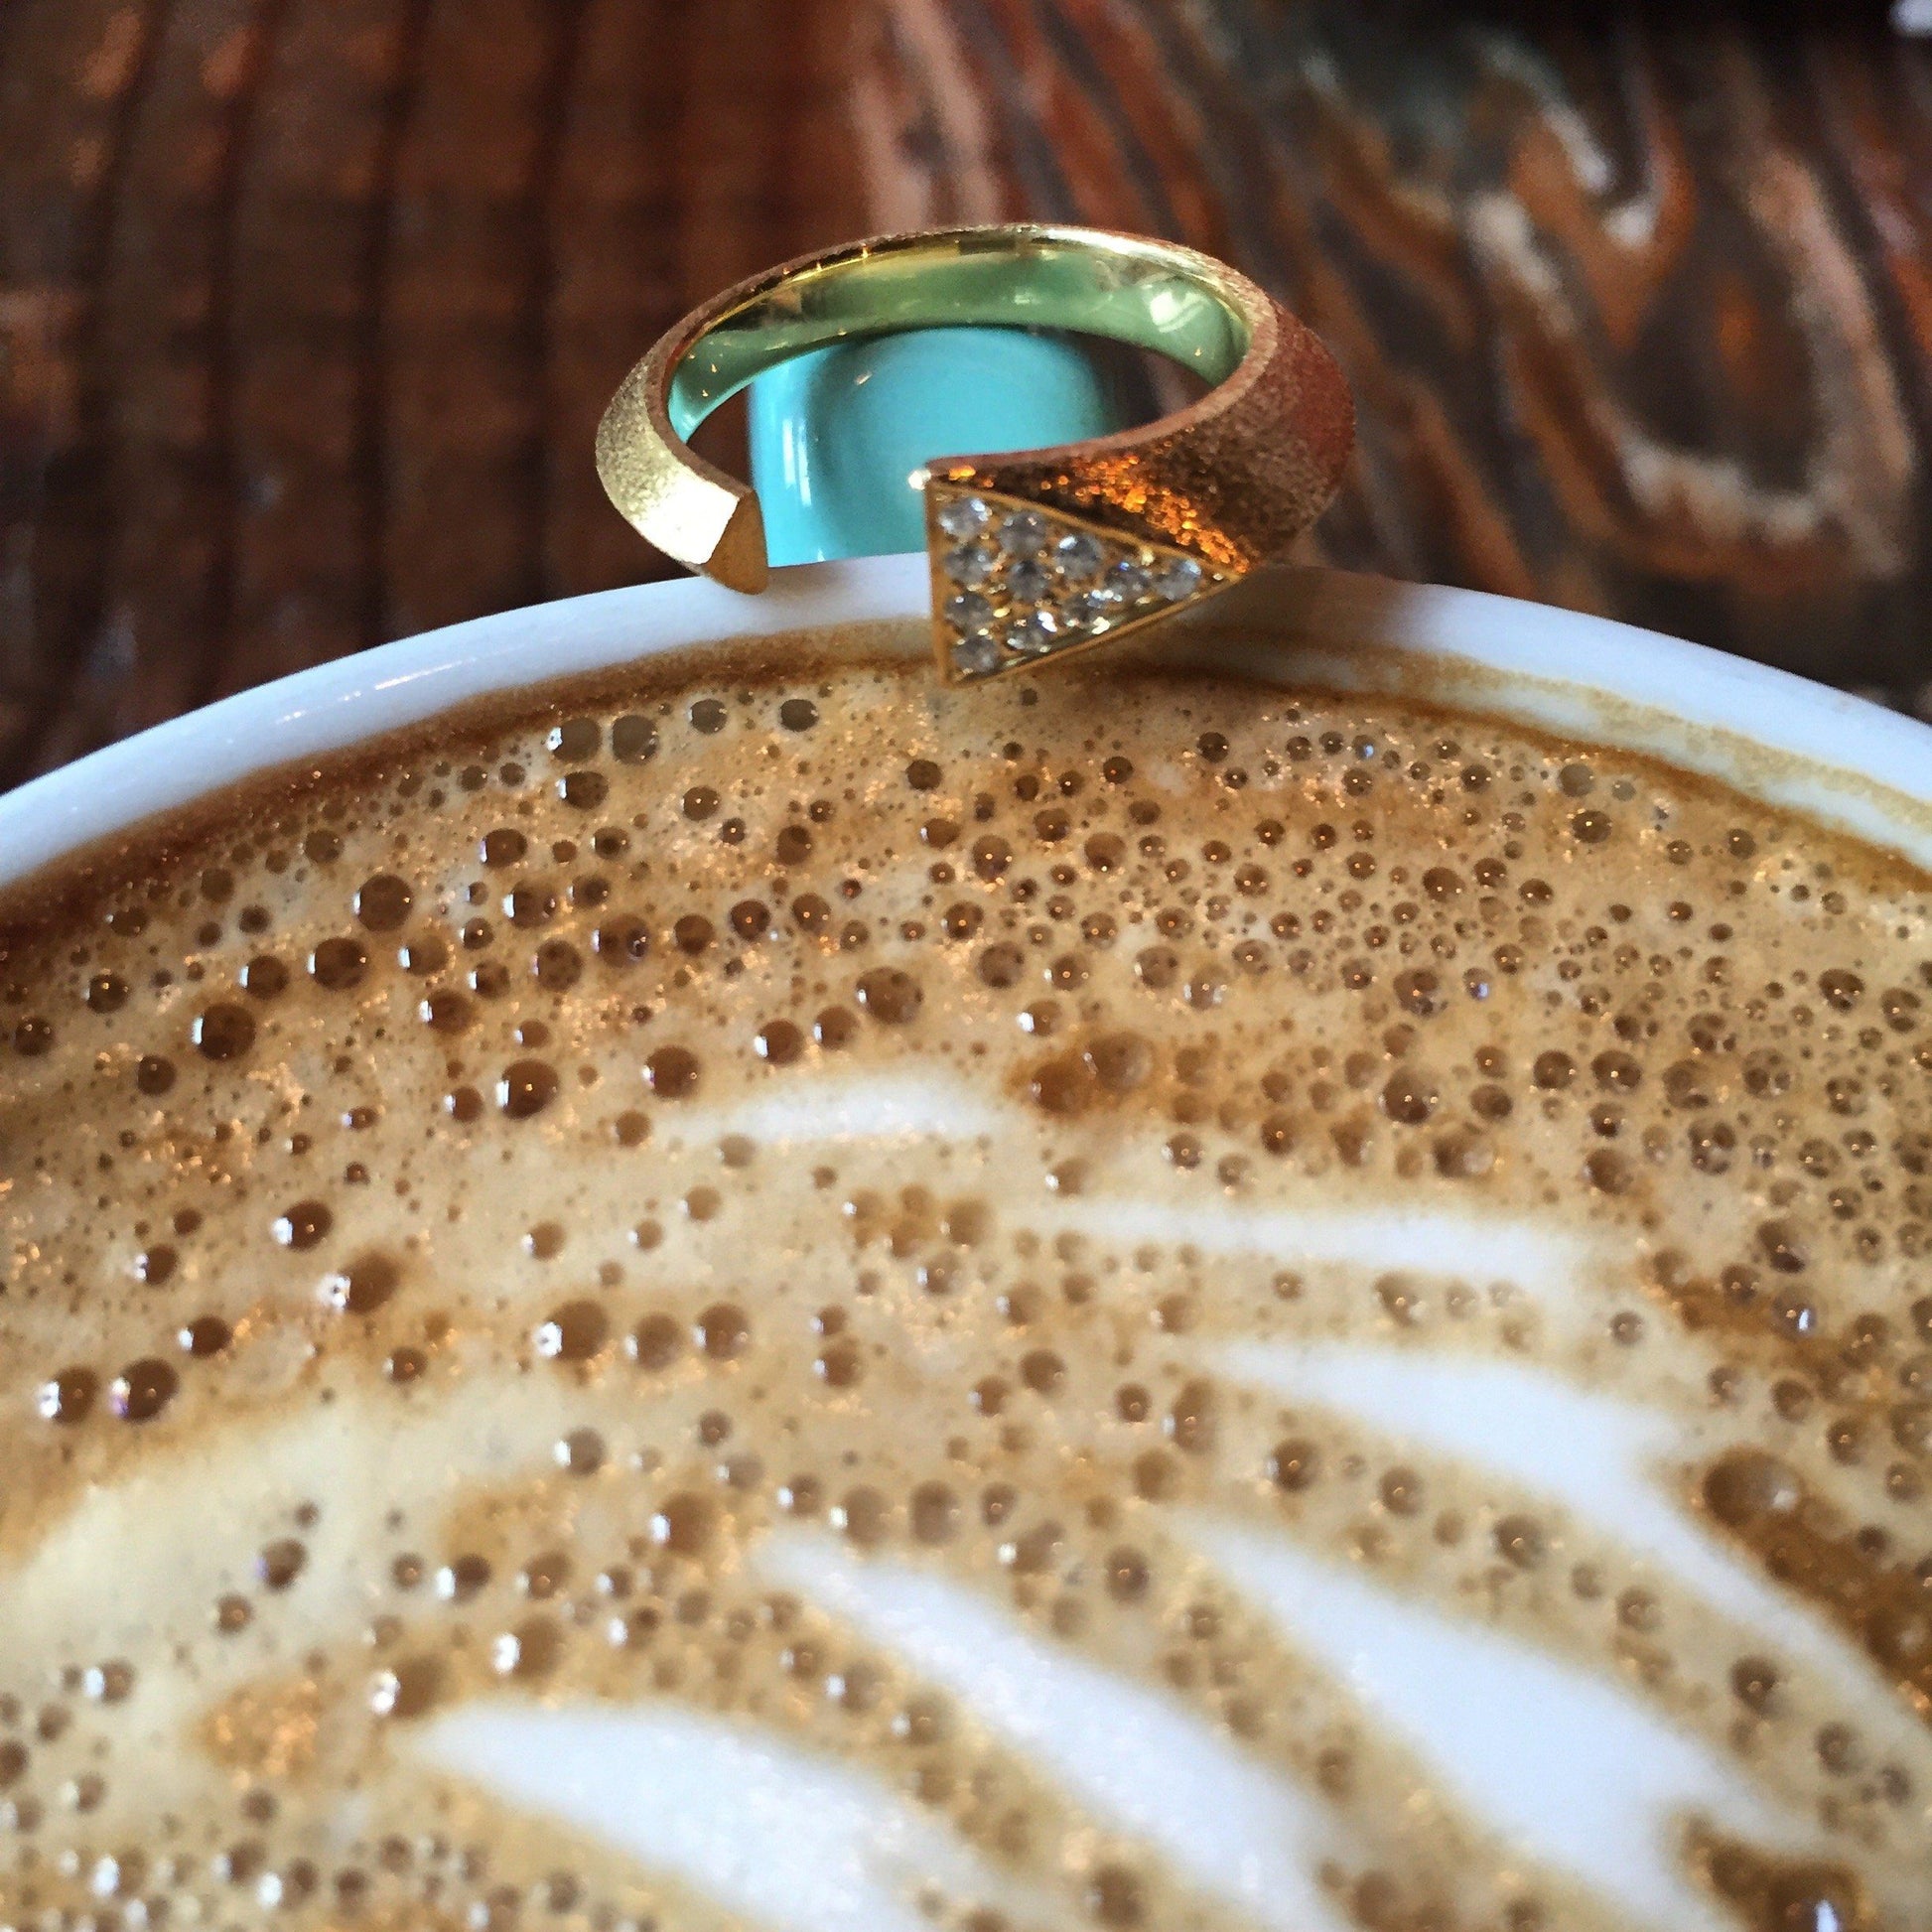 Mantra Dagger Open Ring With White Sapphires sitting on a turquoise cup with latte